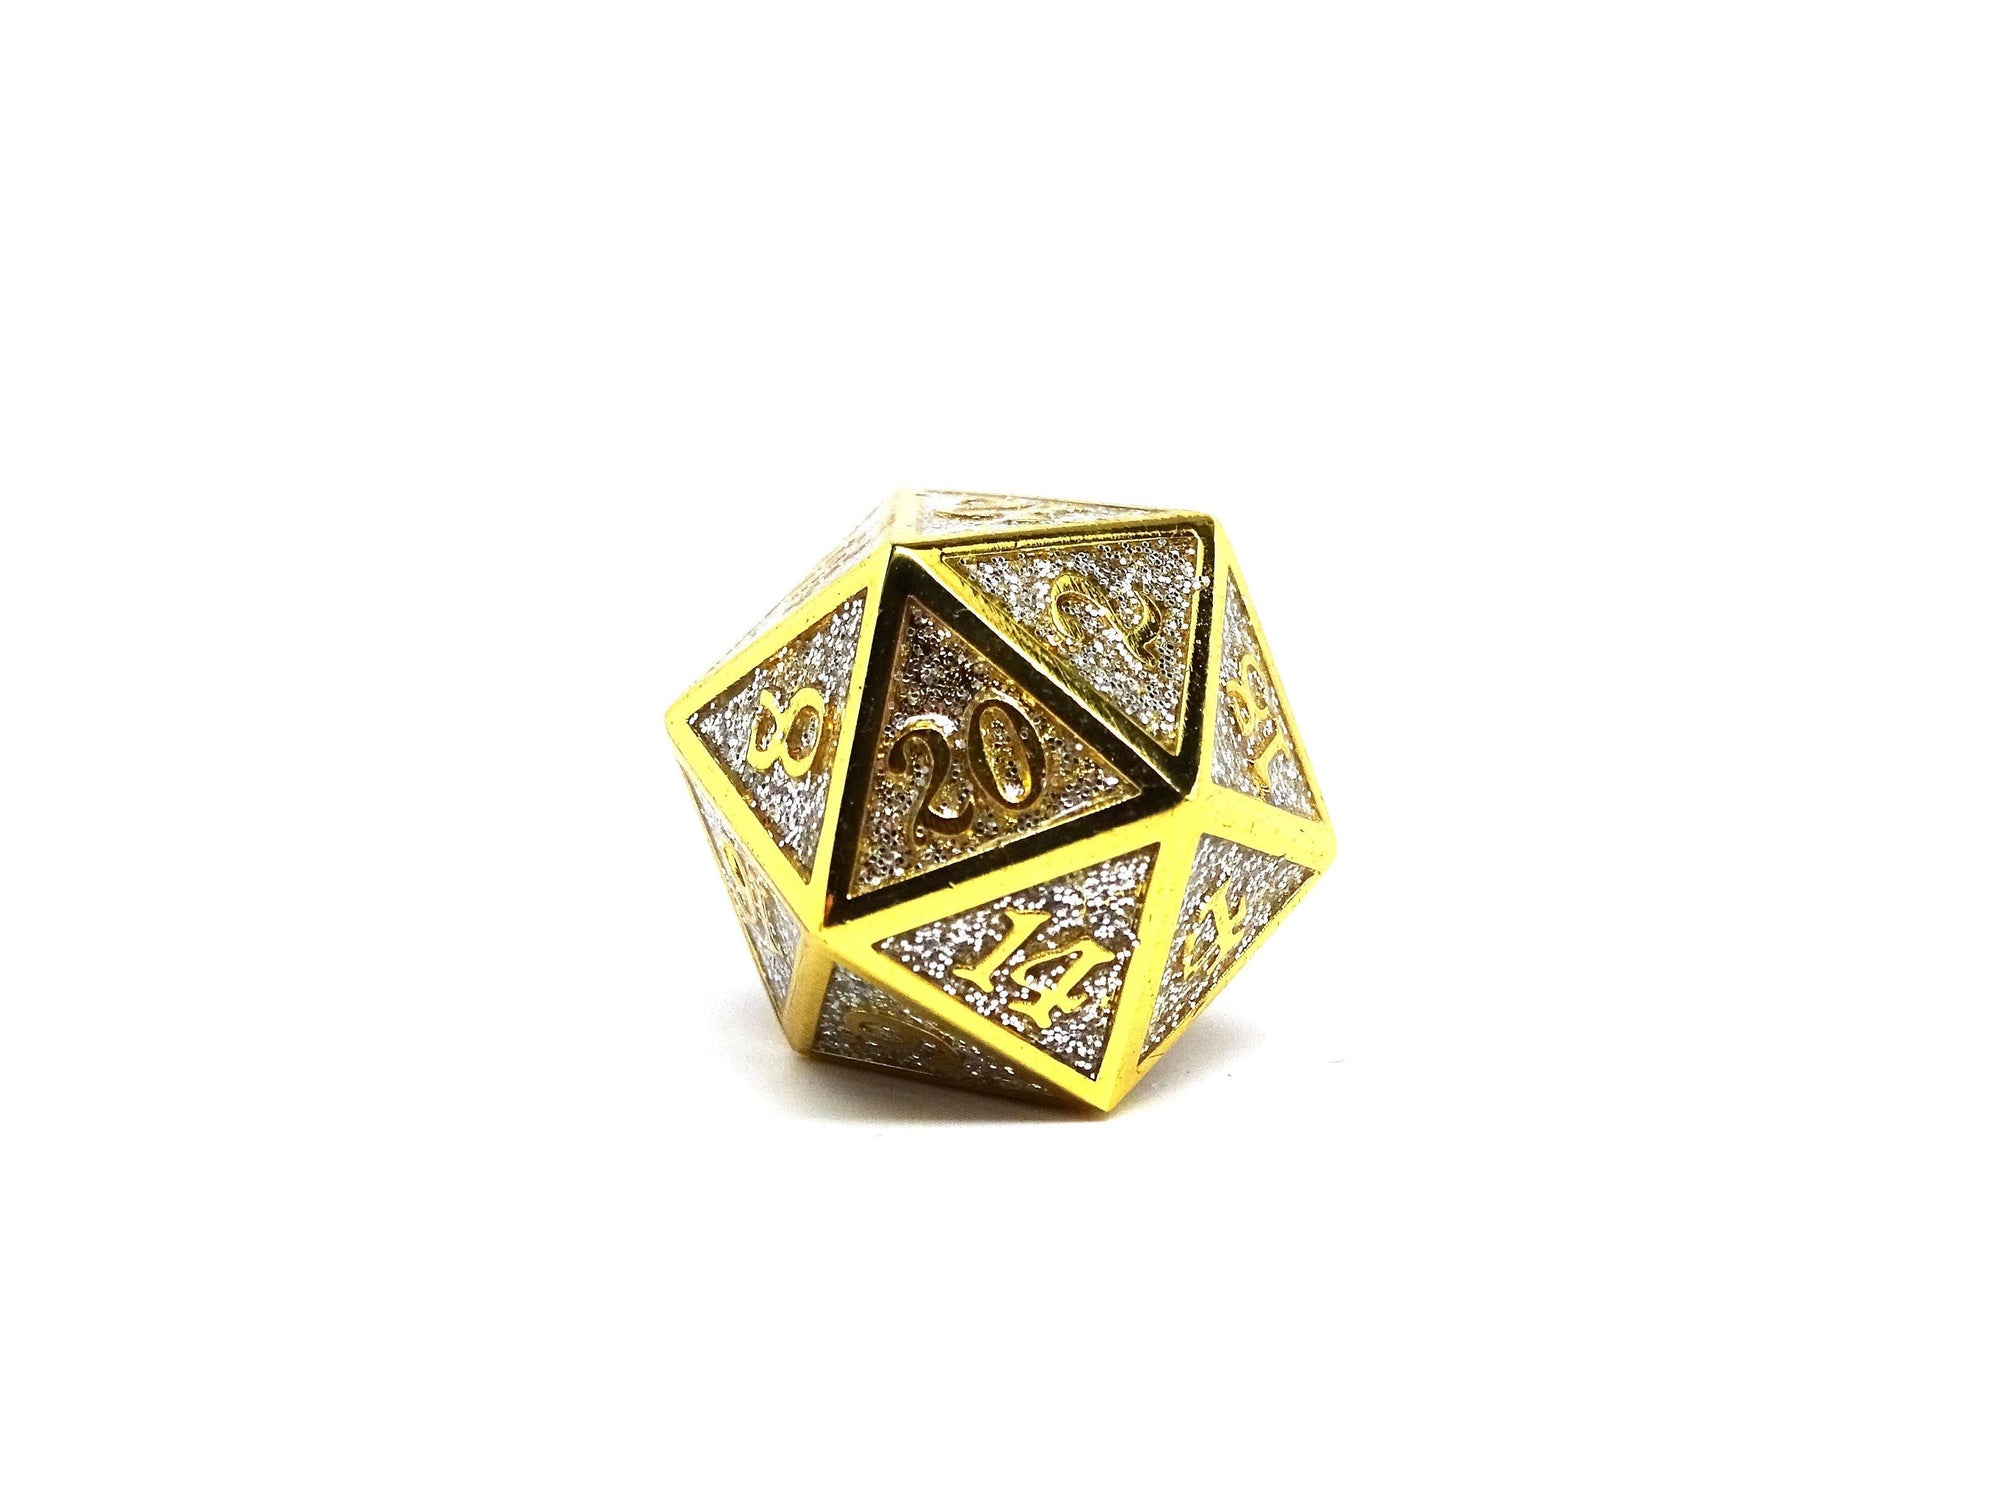 Heroic Dice of Metallic Luster - Single D20 Dice - Silver with Gold Font